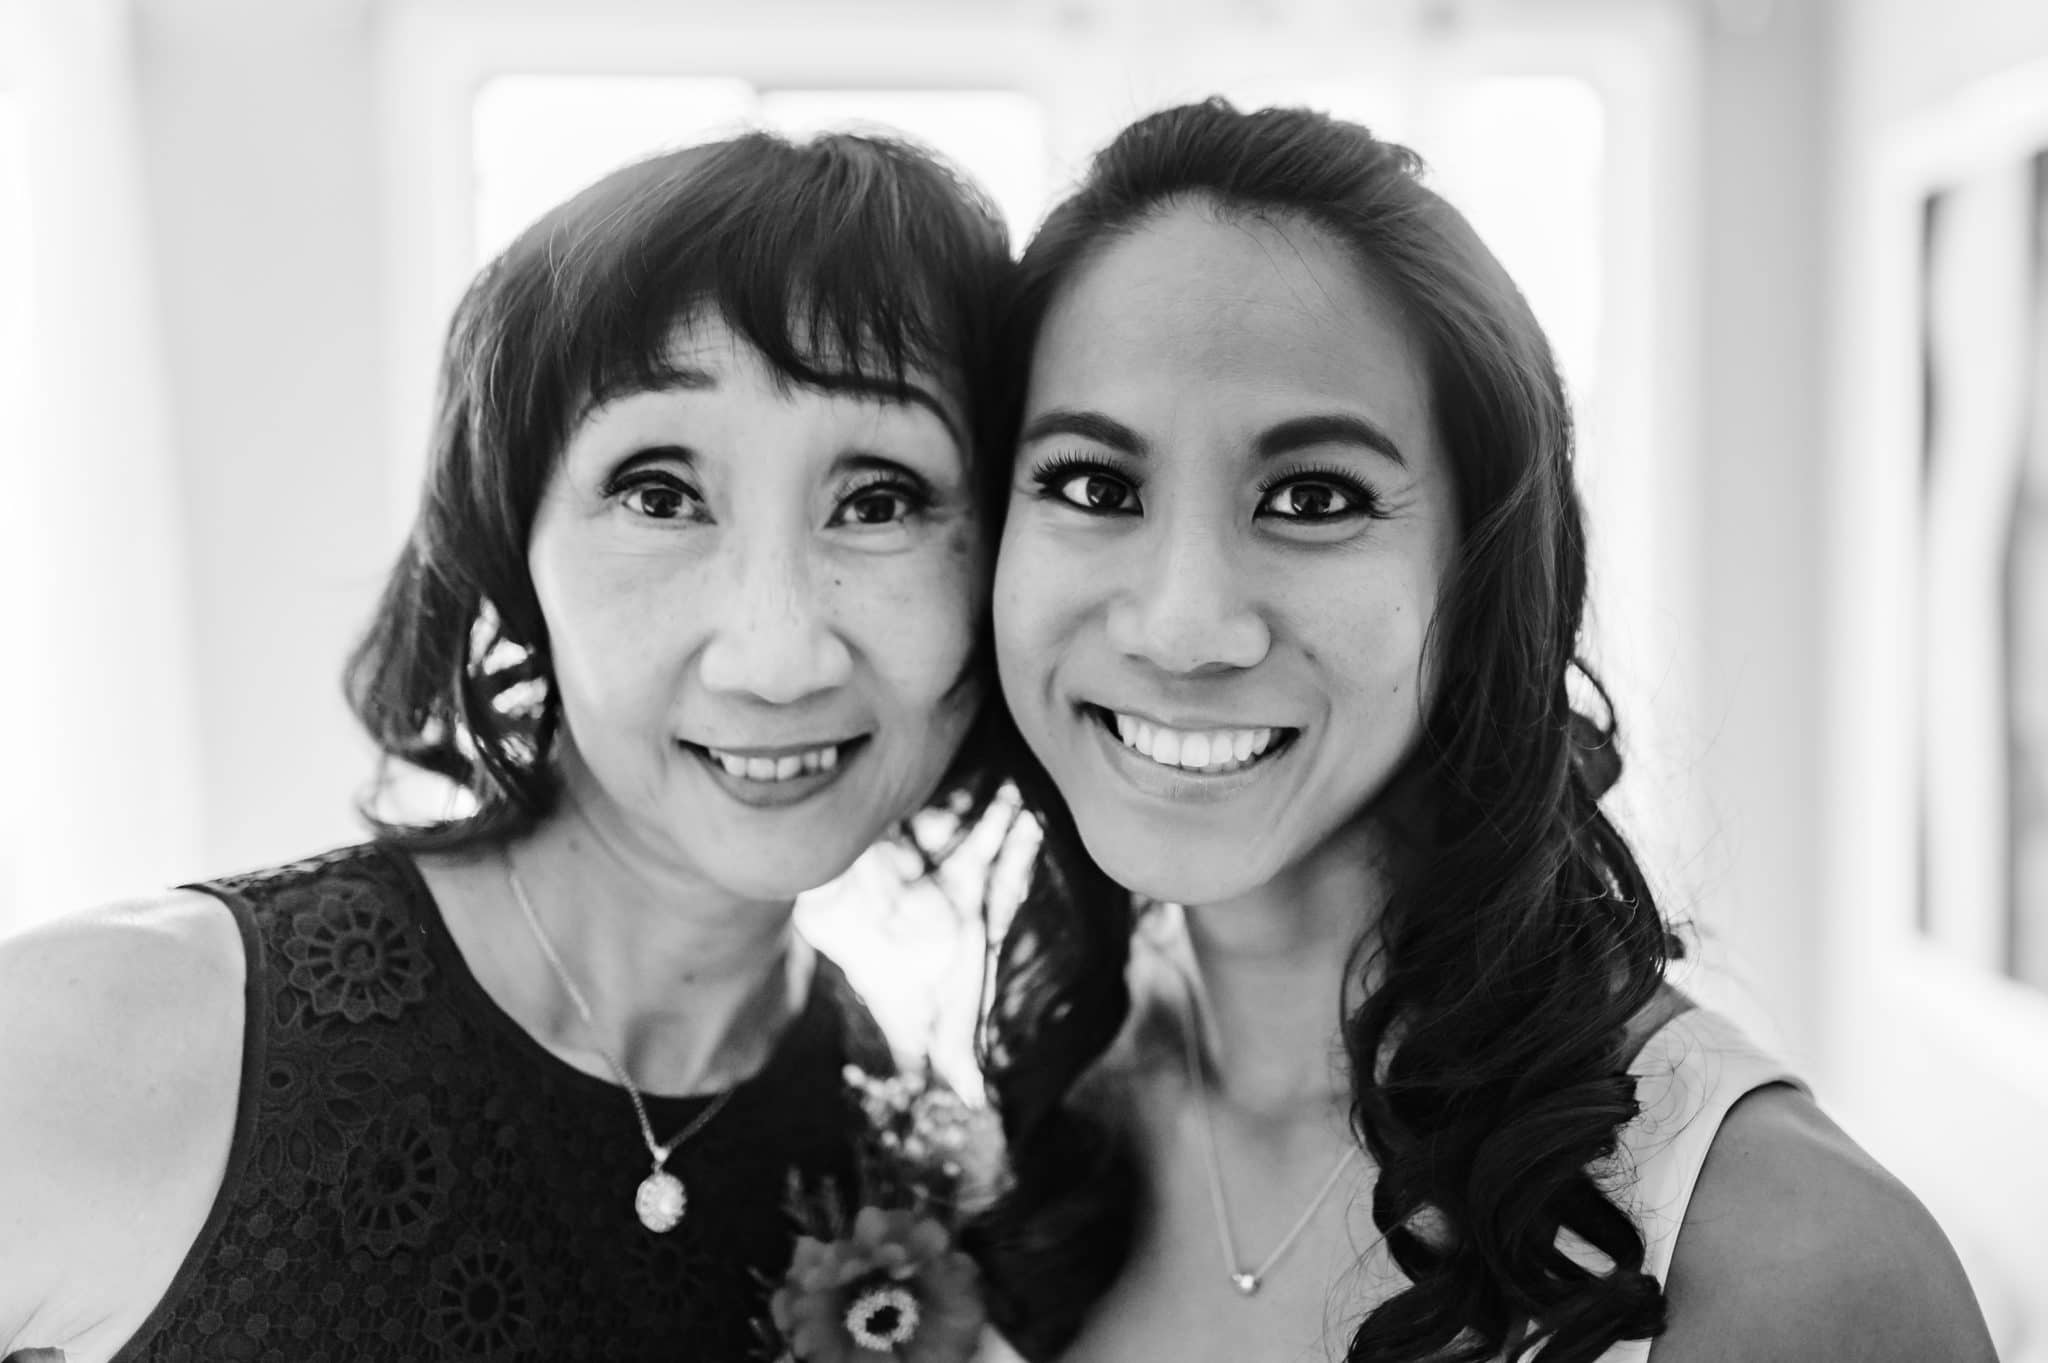 mother and daughter pose for a photo together before the bride goes to marry her man